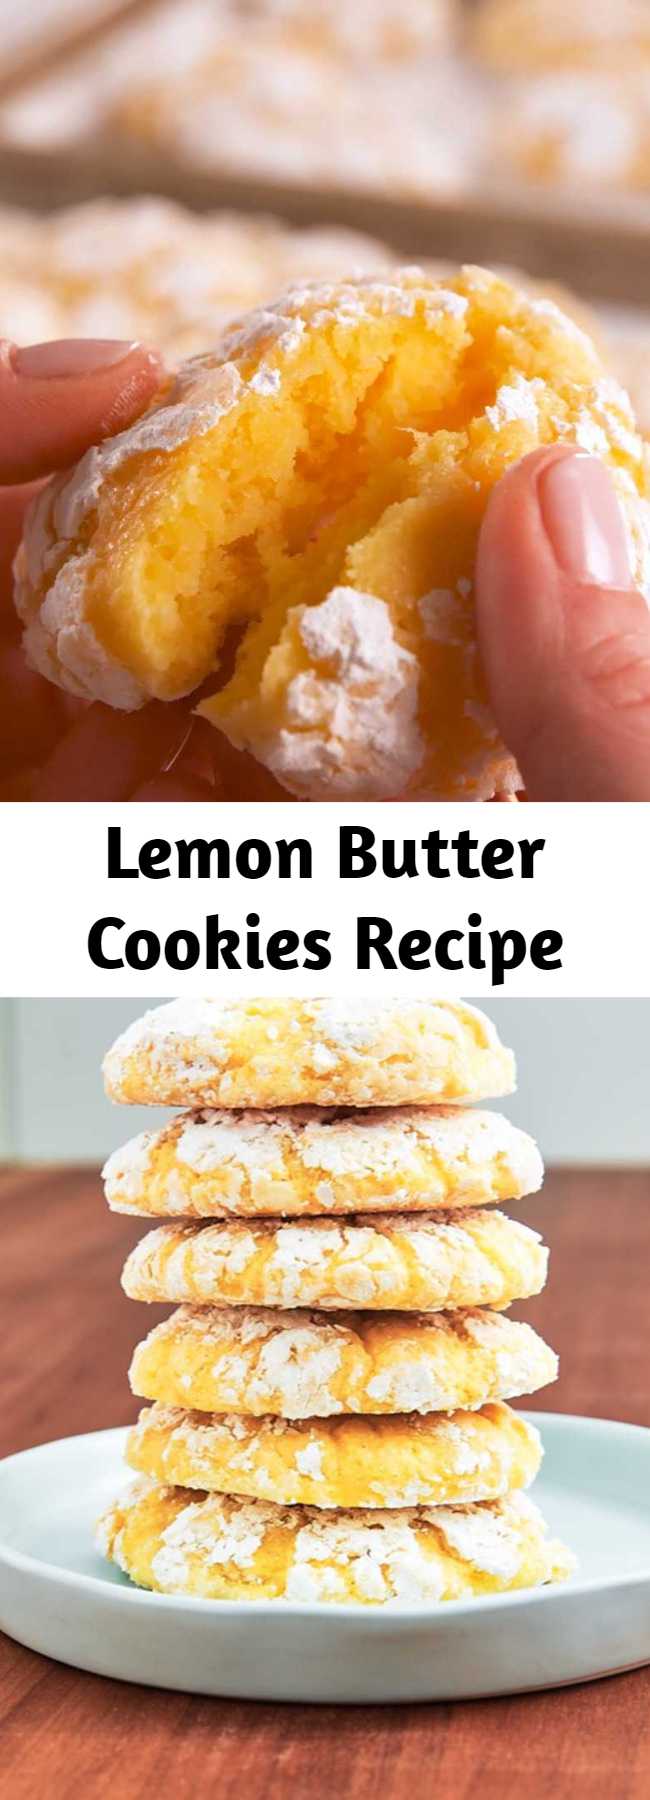 Lemon Butter Cookies Recipe - These cookies have the perfect balance of sweet and tart. It's the treat to make any day a little better. #easy #recipe #lemon #butter #cookies #lemonbuttercookies #springdesserts #dessertideas #dessert